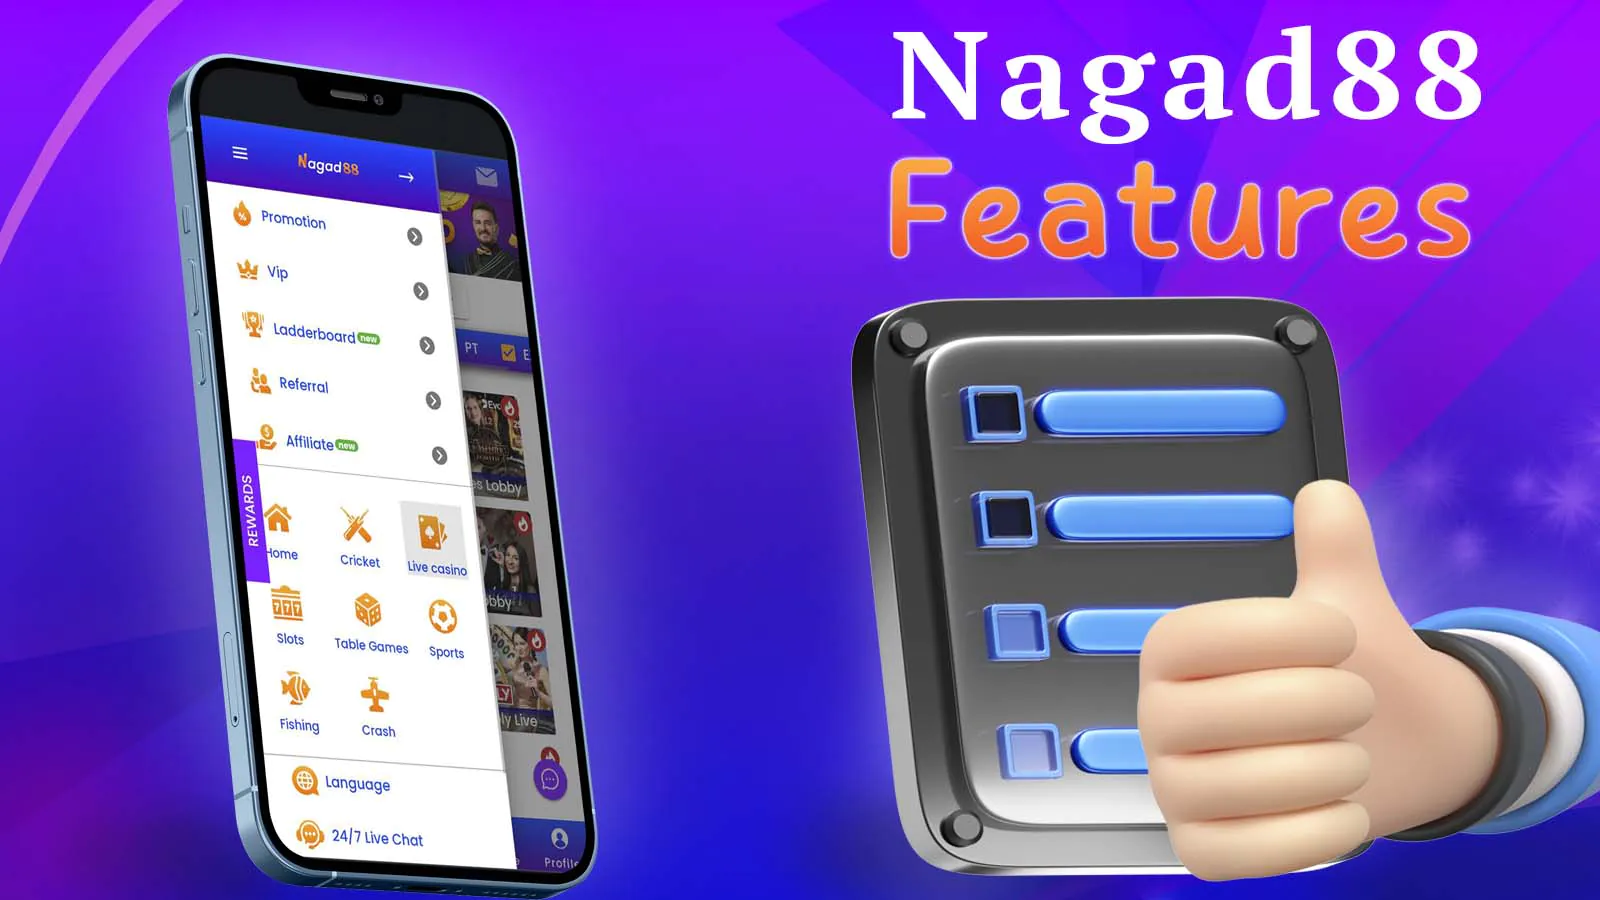 When you register with Nagad88, you will have 24 hours and 7 days unlimited access to the following features of the platform